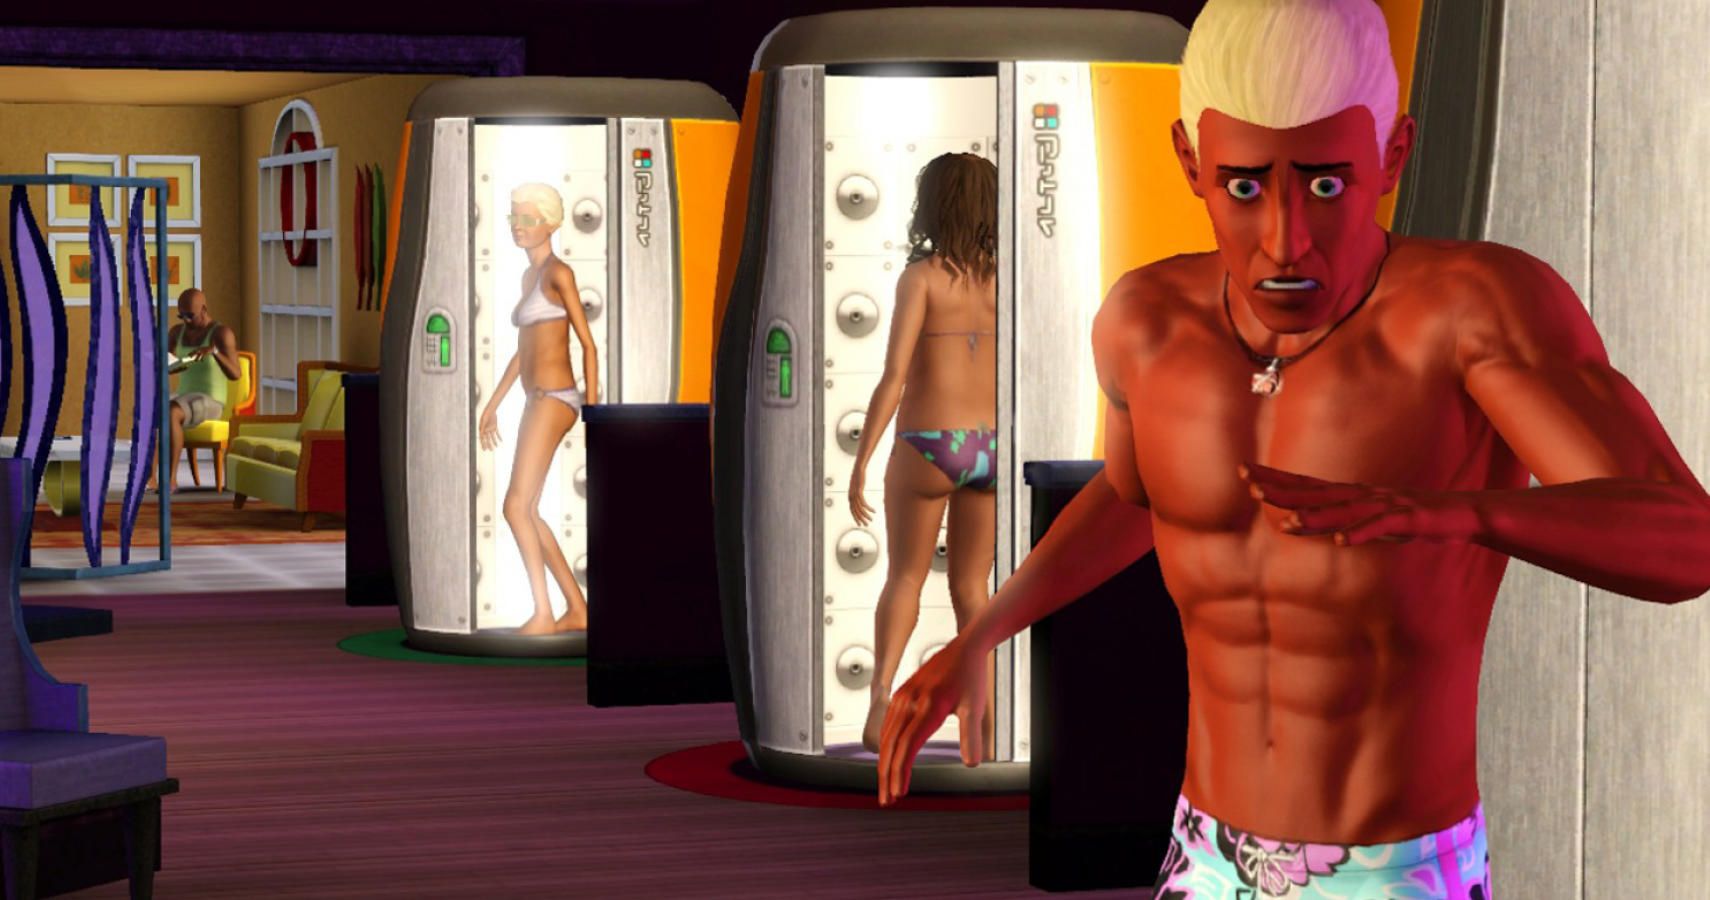 3 sims entering and exiting tanning booths in a sims 3 salon